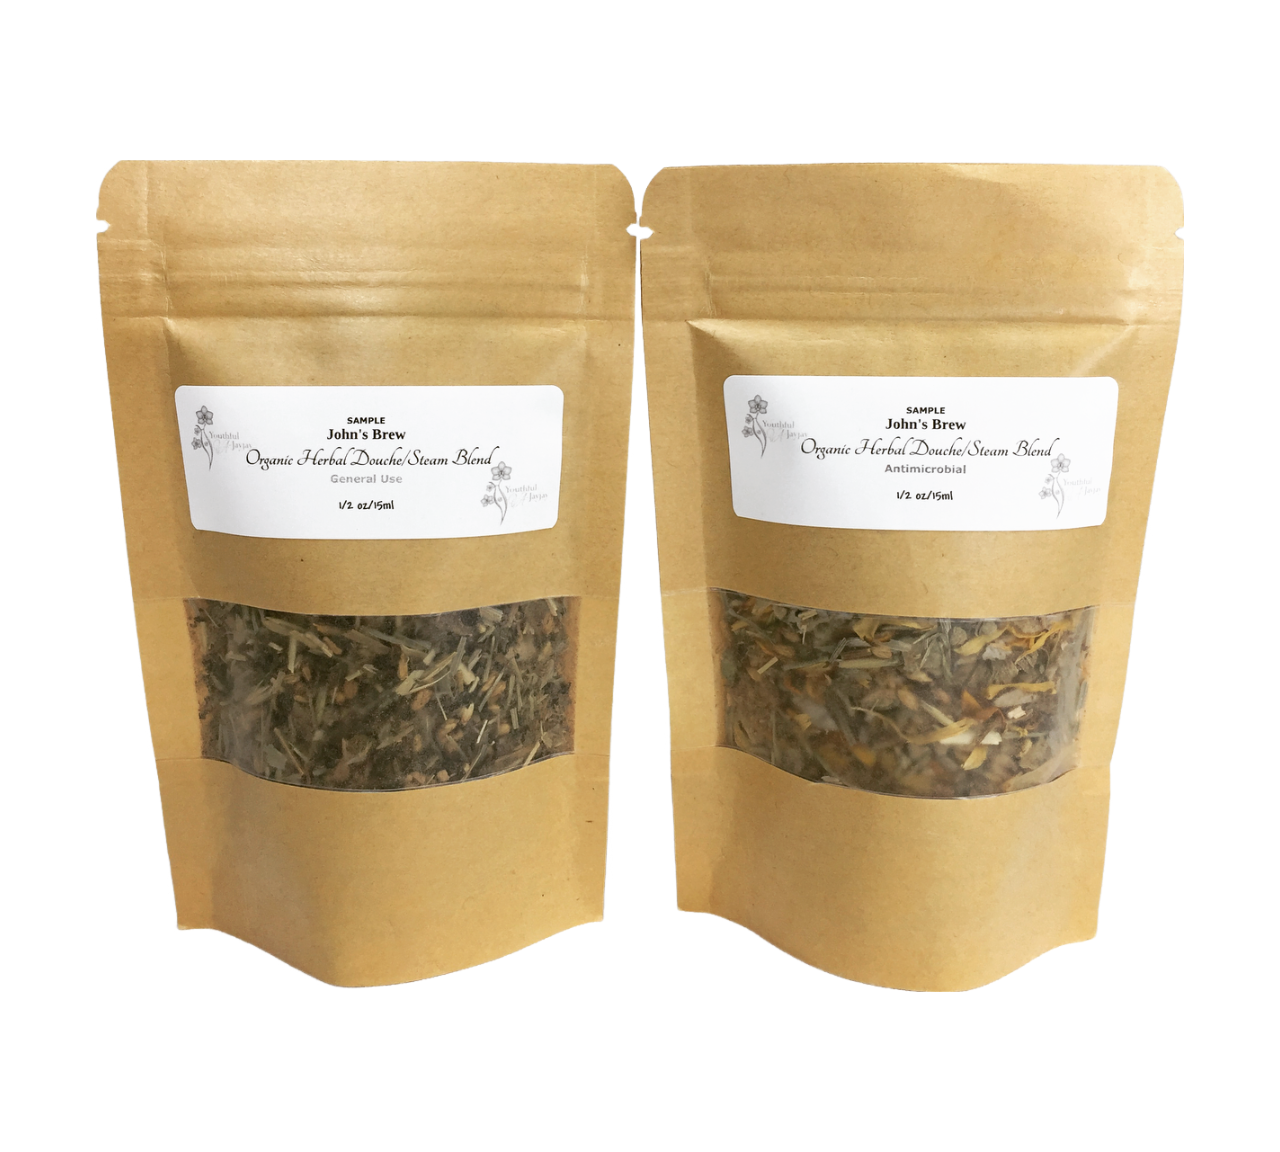 JOHN'S BREW- Organic Herbal Douche/Steam Blend: For Him, Handcrafted Sample Size, G/C 1/2oz.